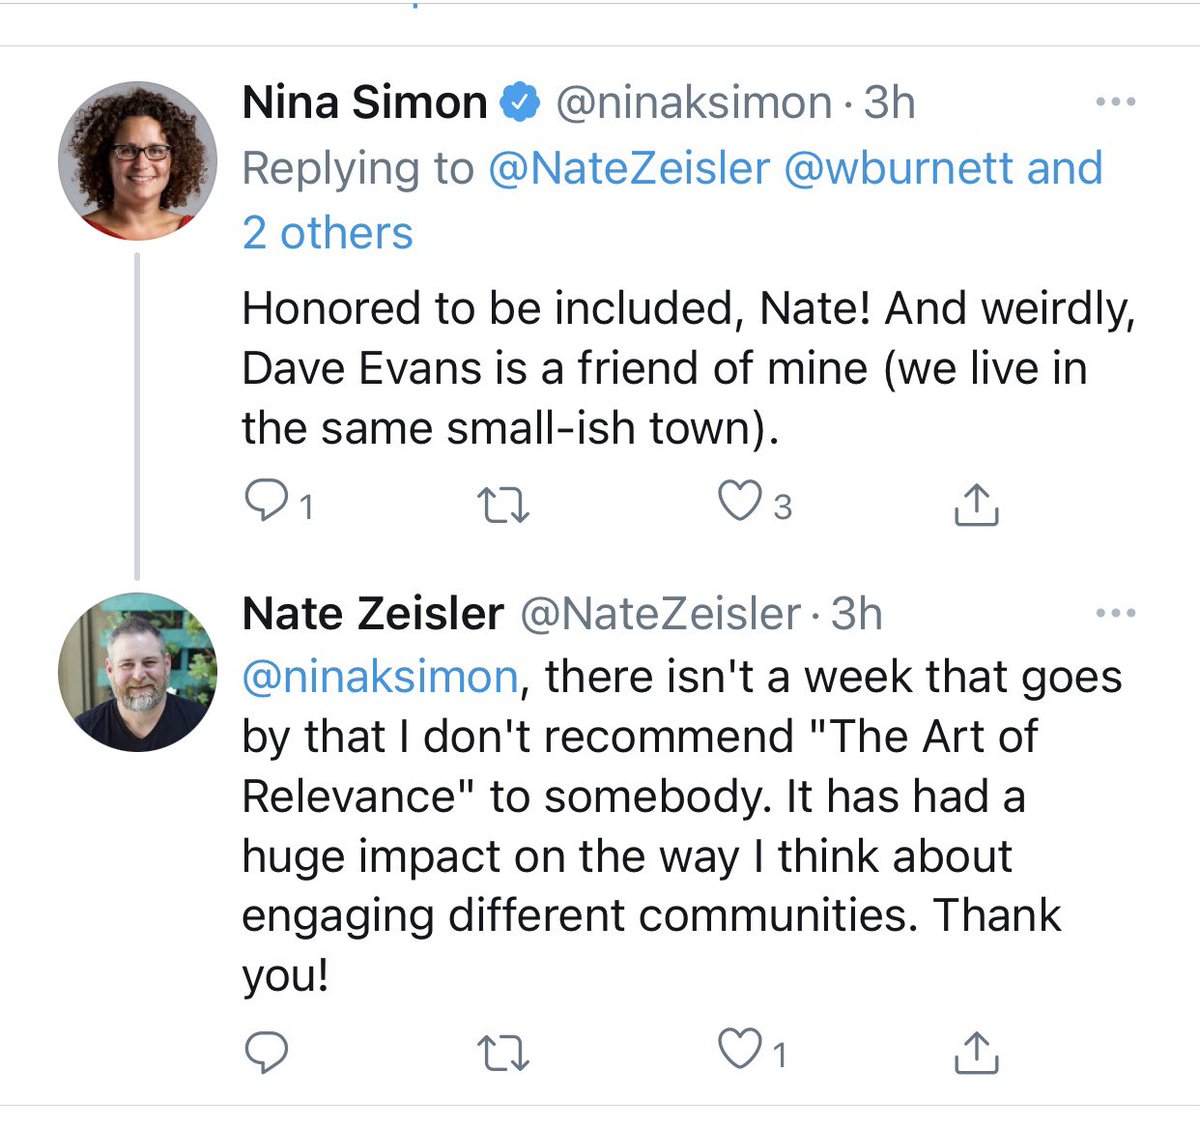 9. It appears one of the authors of the books  @NateZeisler recommended who has 24k followers has replied to him and thanked him. This is how Twitter works - you get on people’s radar one tweet at a time. Maybe it leads to nothing, but maybe it leads to something.